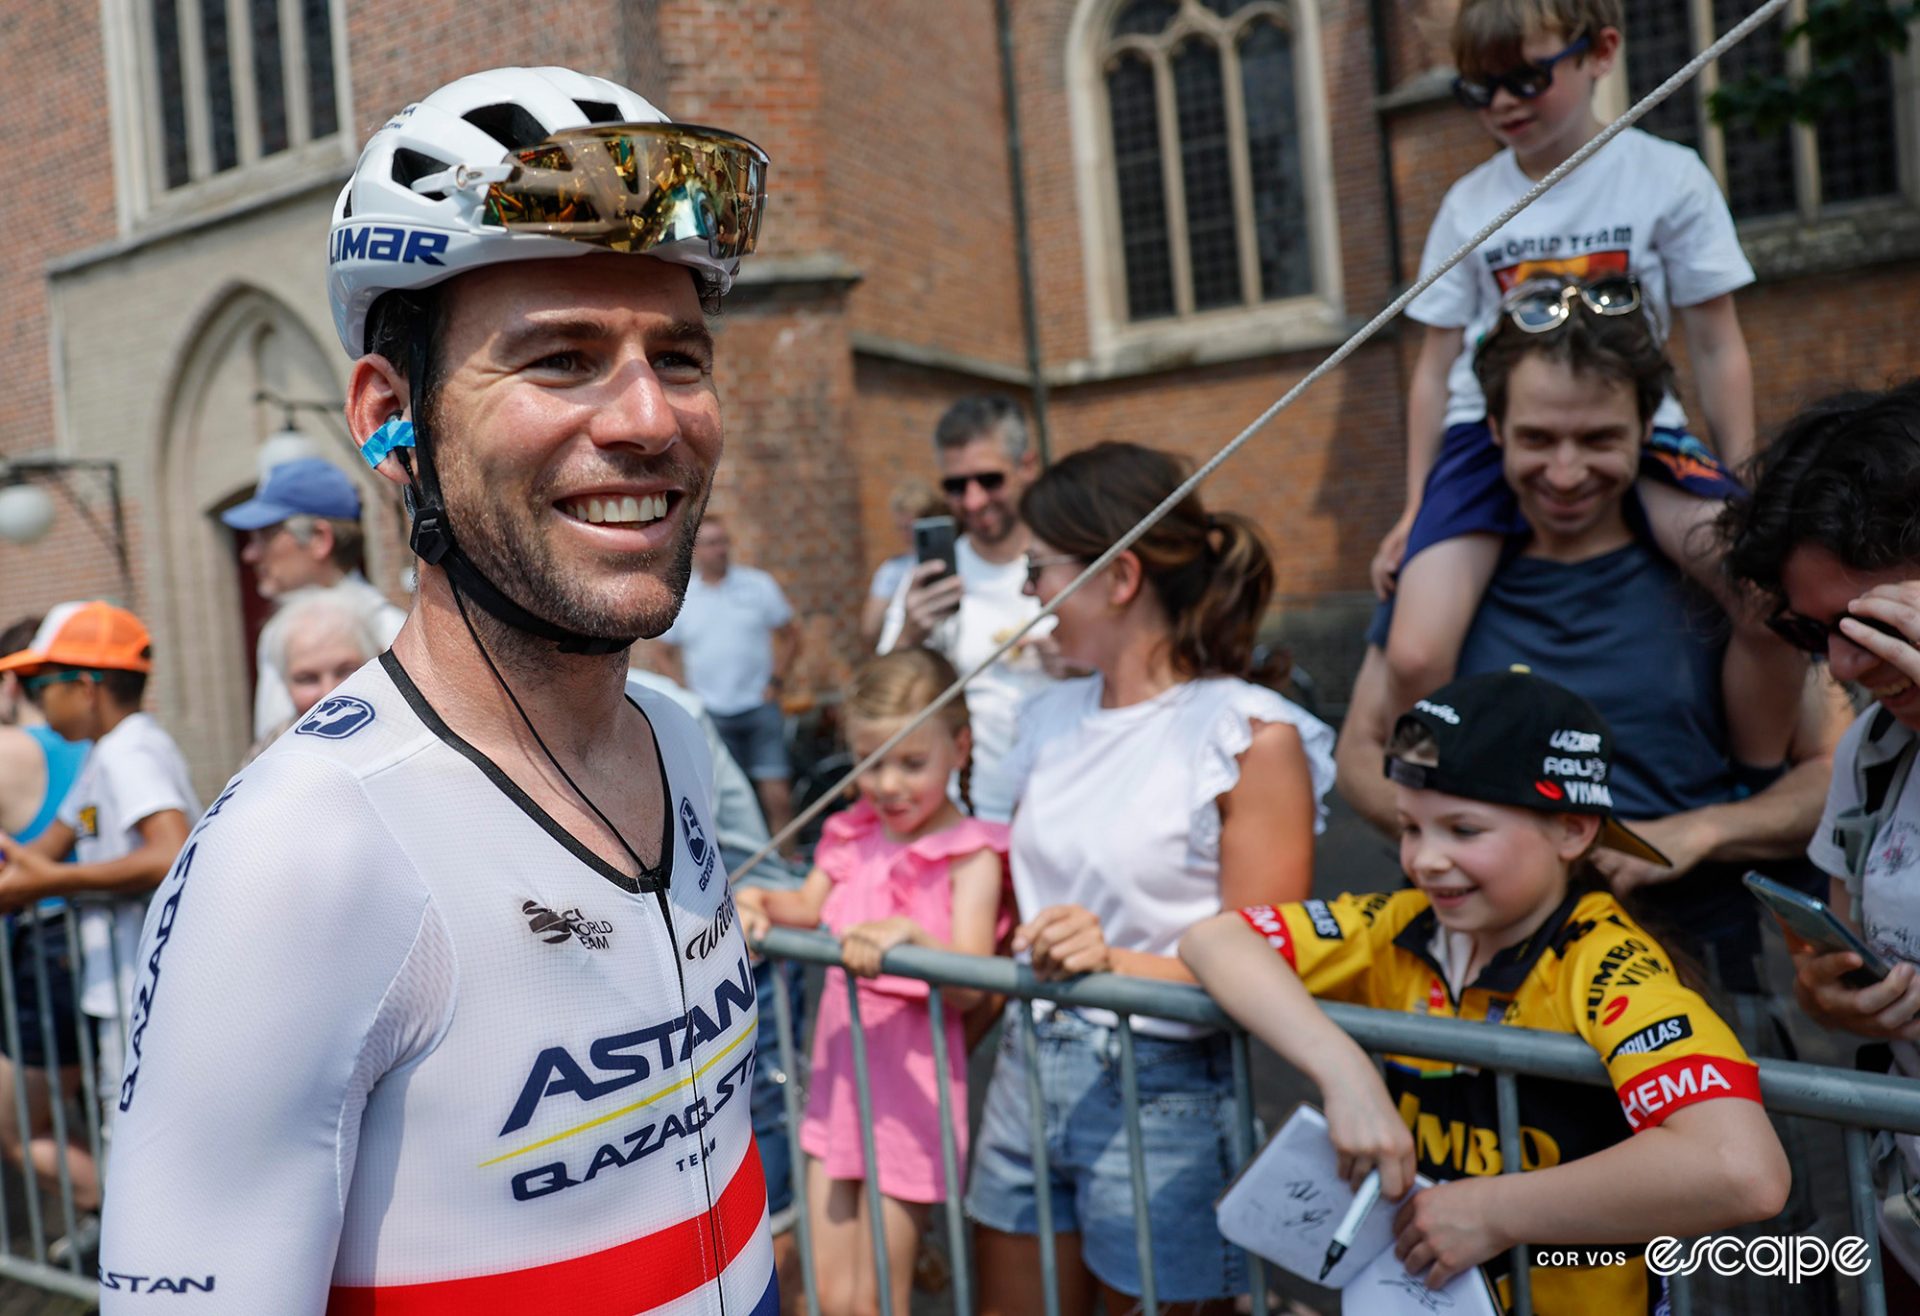 A long pause while holding back tears, Mark Cavendish prepares to sail ...